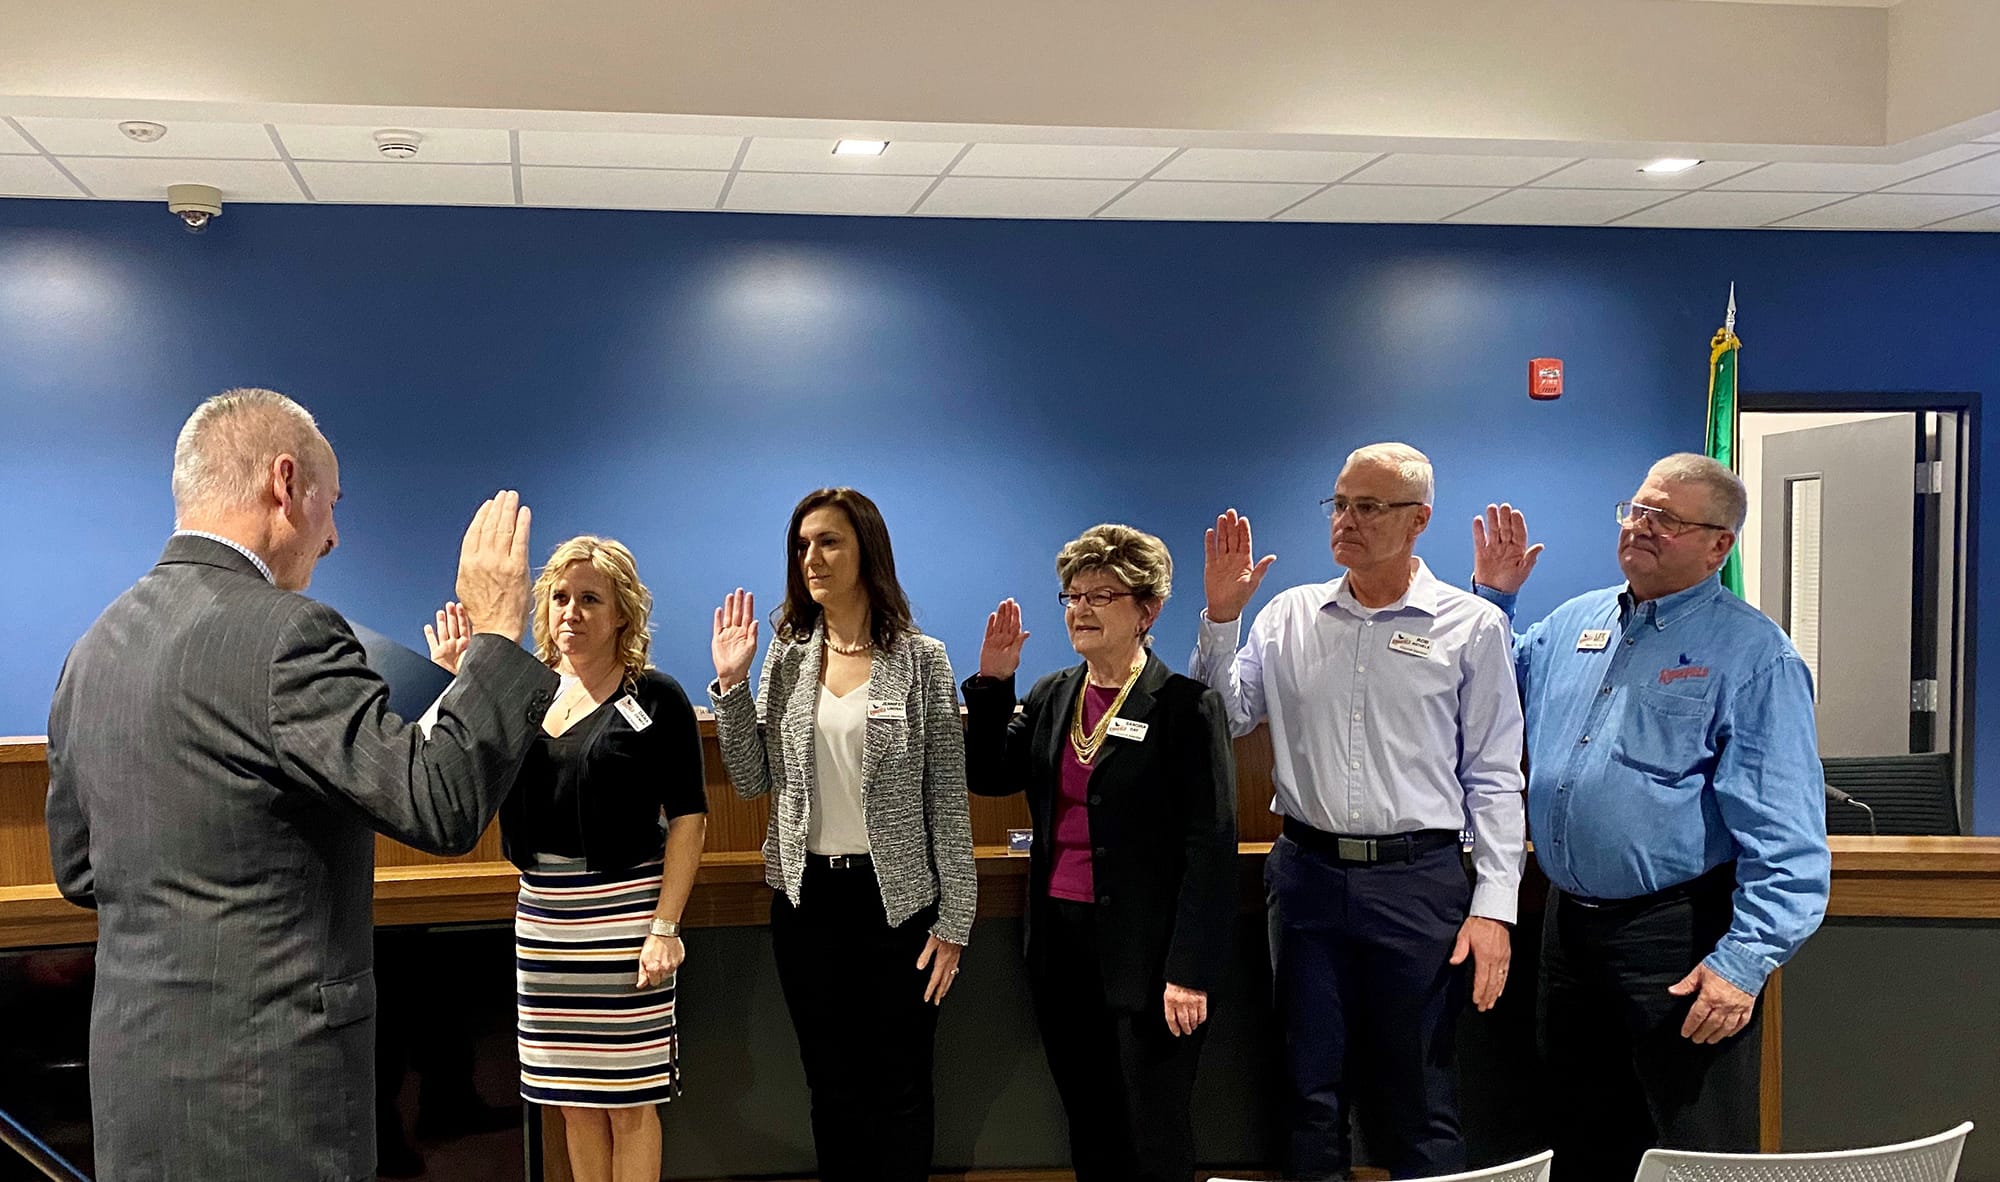 Clark County District Court Judge Darvin Zimmerman, left, swears in members of the new Ridgefield City Council at the Jan. 9 meeting: Dana Ziemer, from left, Jennifer Lindsay, Sandra Day, Rob Aichele and Lee Wells.